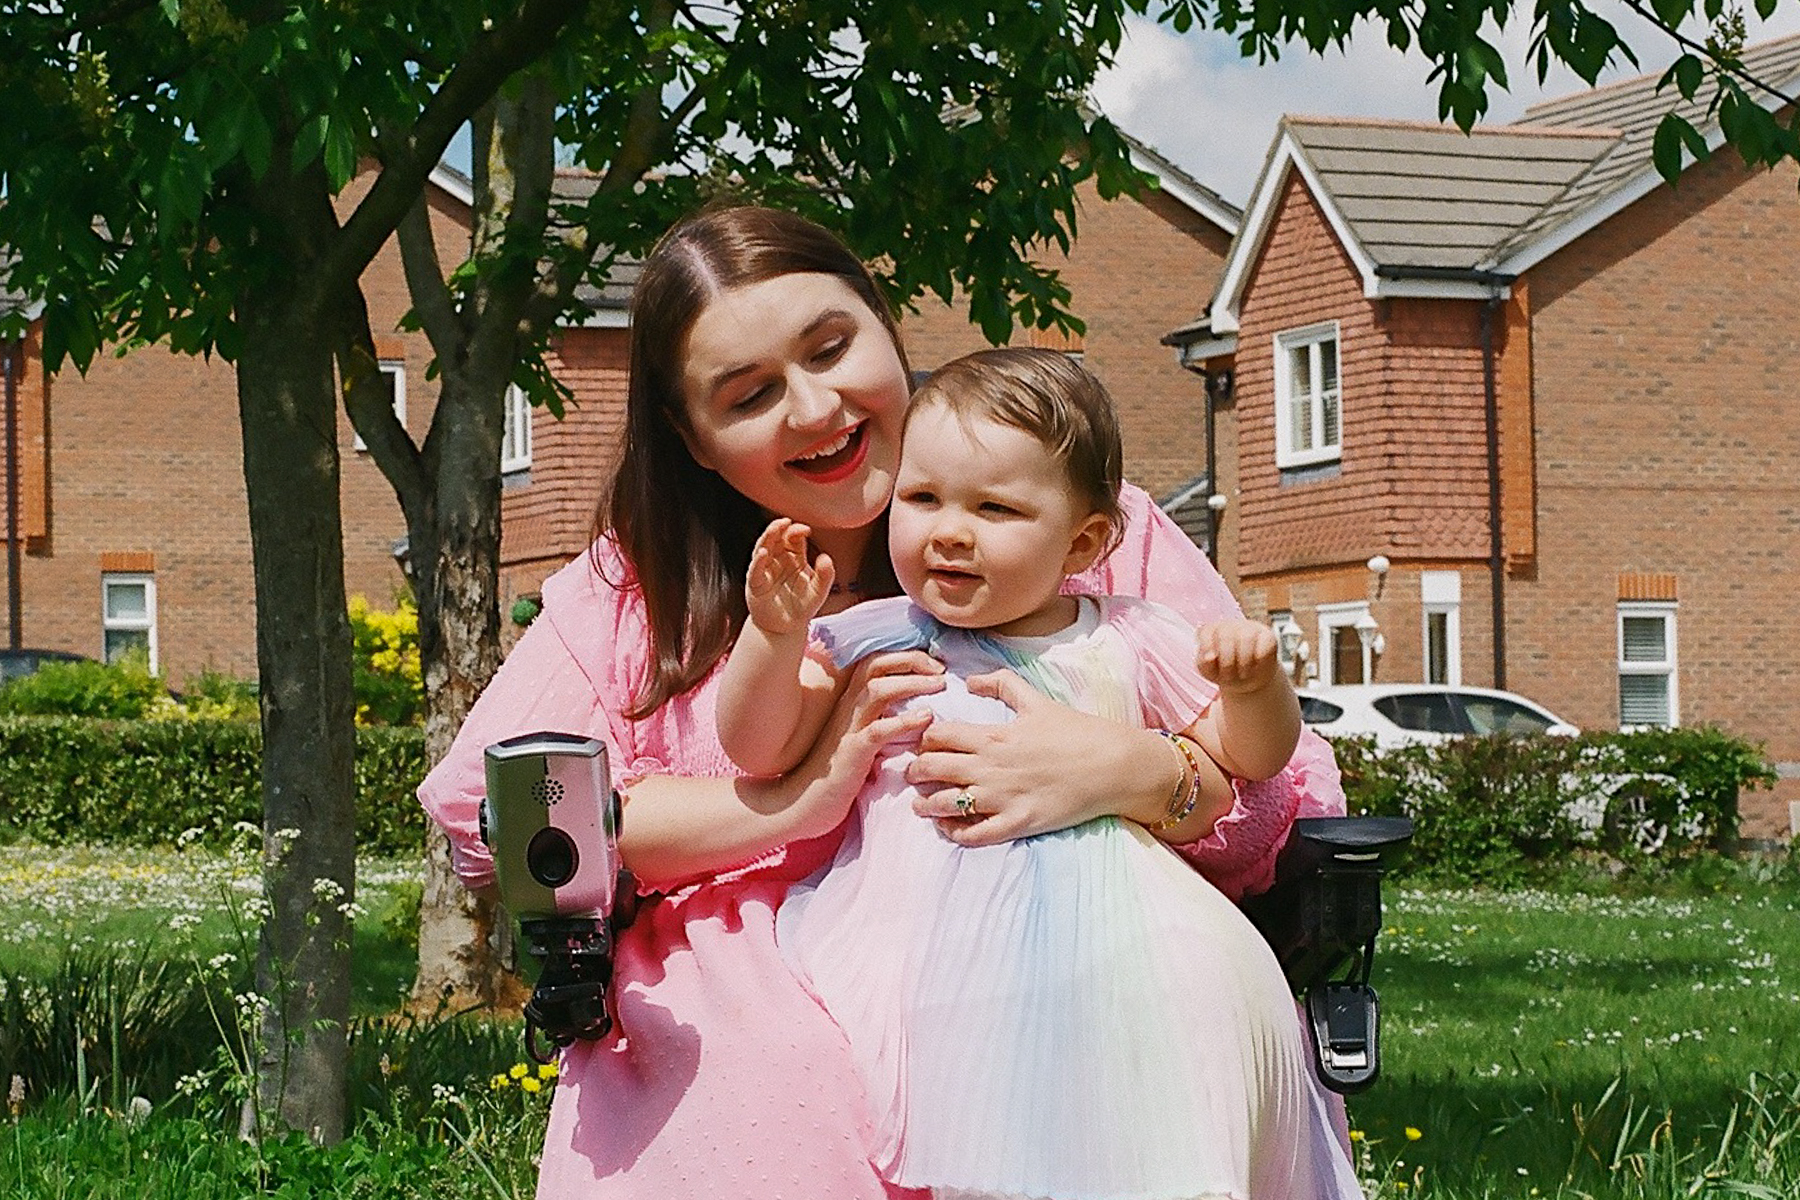 A photo of mother Sophie sitting in her wheelchair smiling and holding her young child against a backdrop of houses and greenery